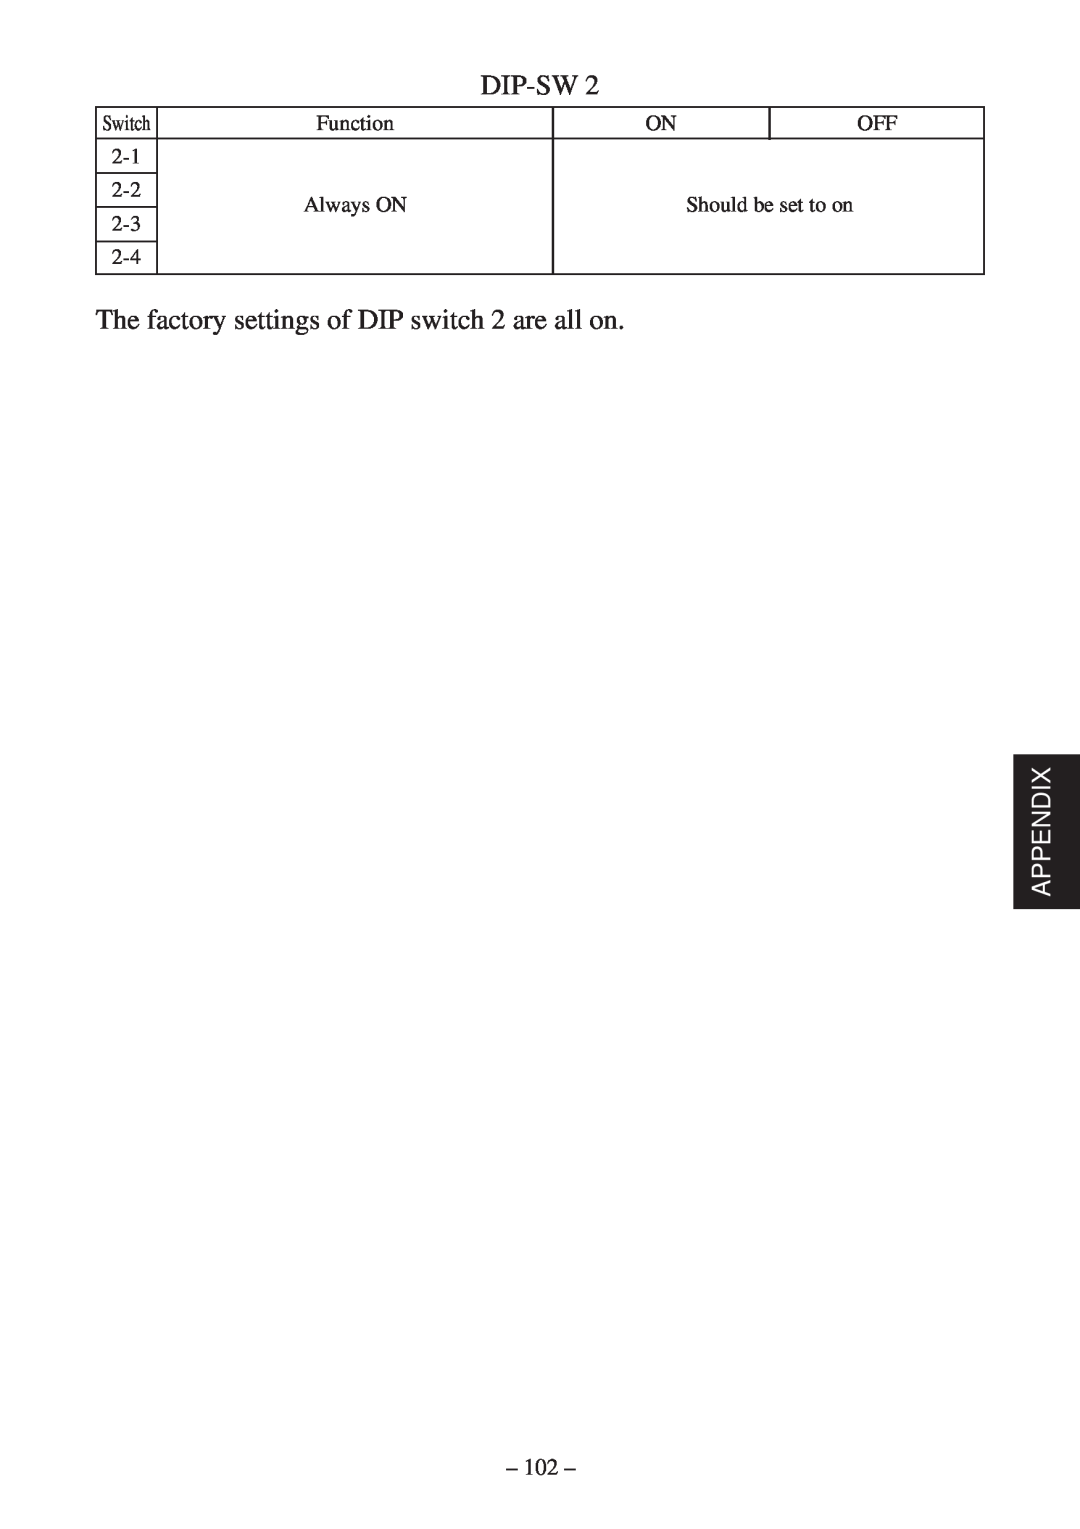 Star Micronics TSP600 user manual Dip-Sw, The factory settings of DIP switch 2 are all on, Appendix, Switch 